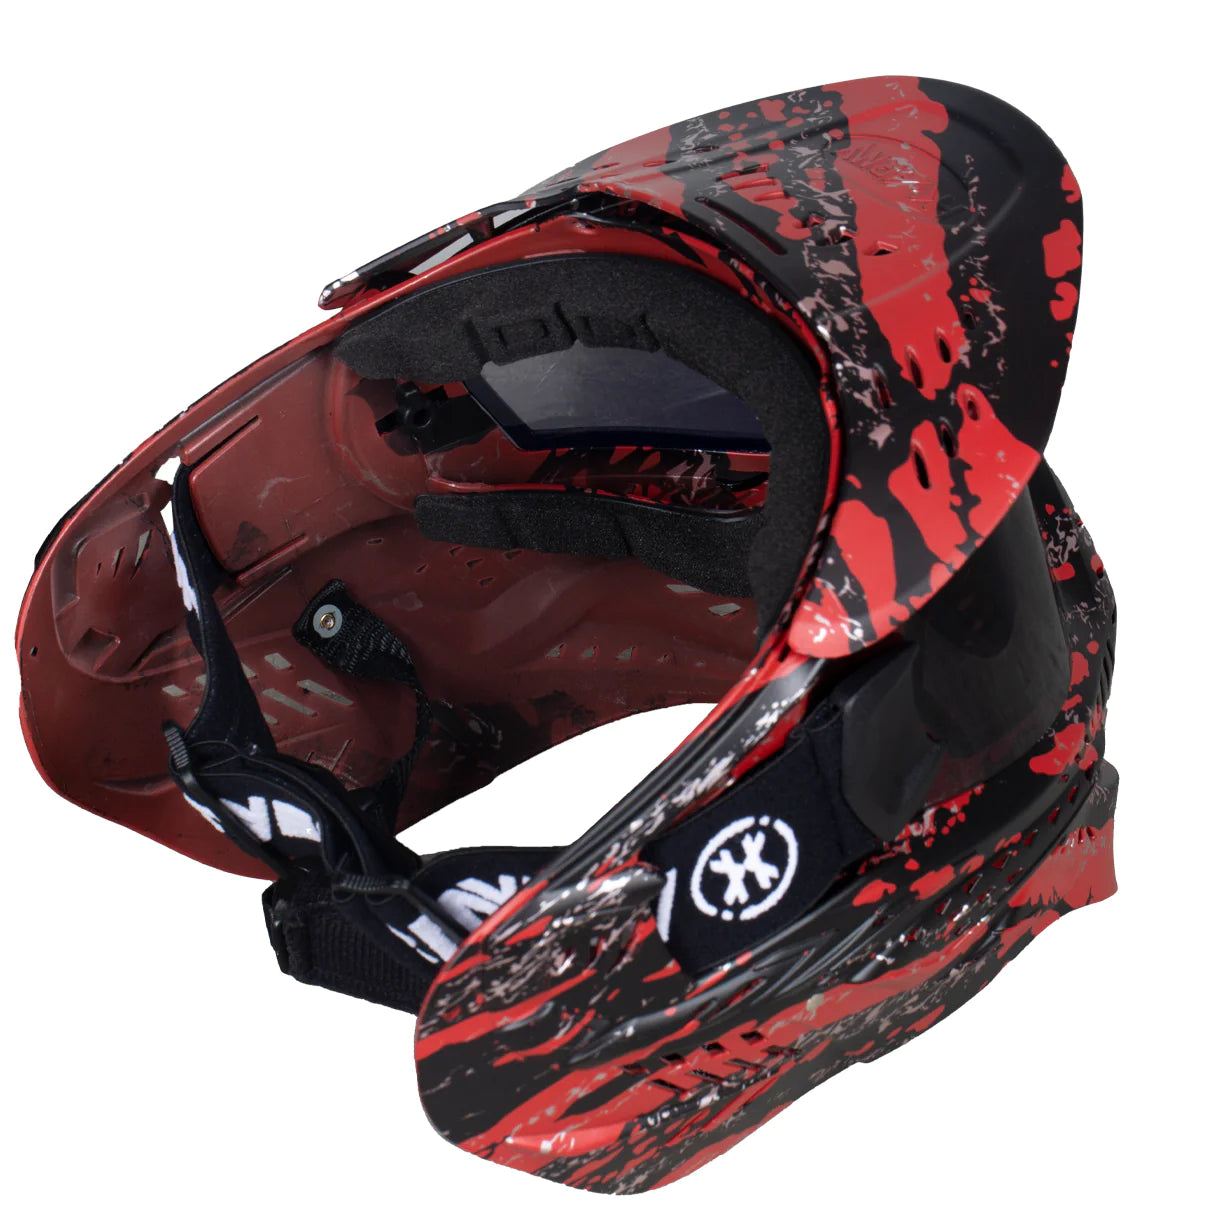 HSTL Goggle | Fracture Black/Red | Paintball & Airsoft Goggle